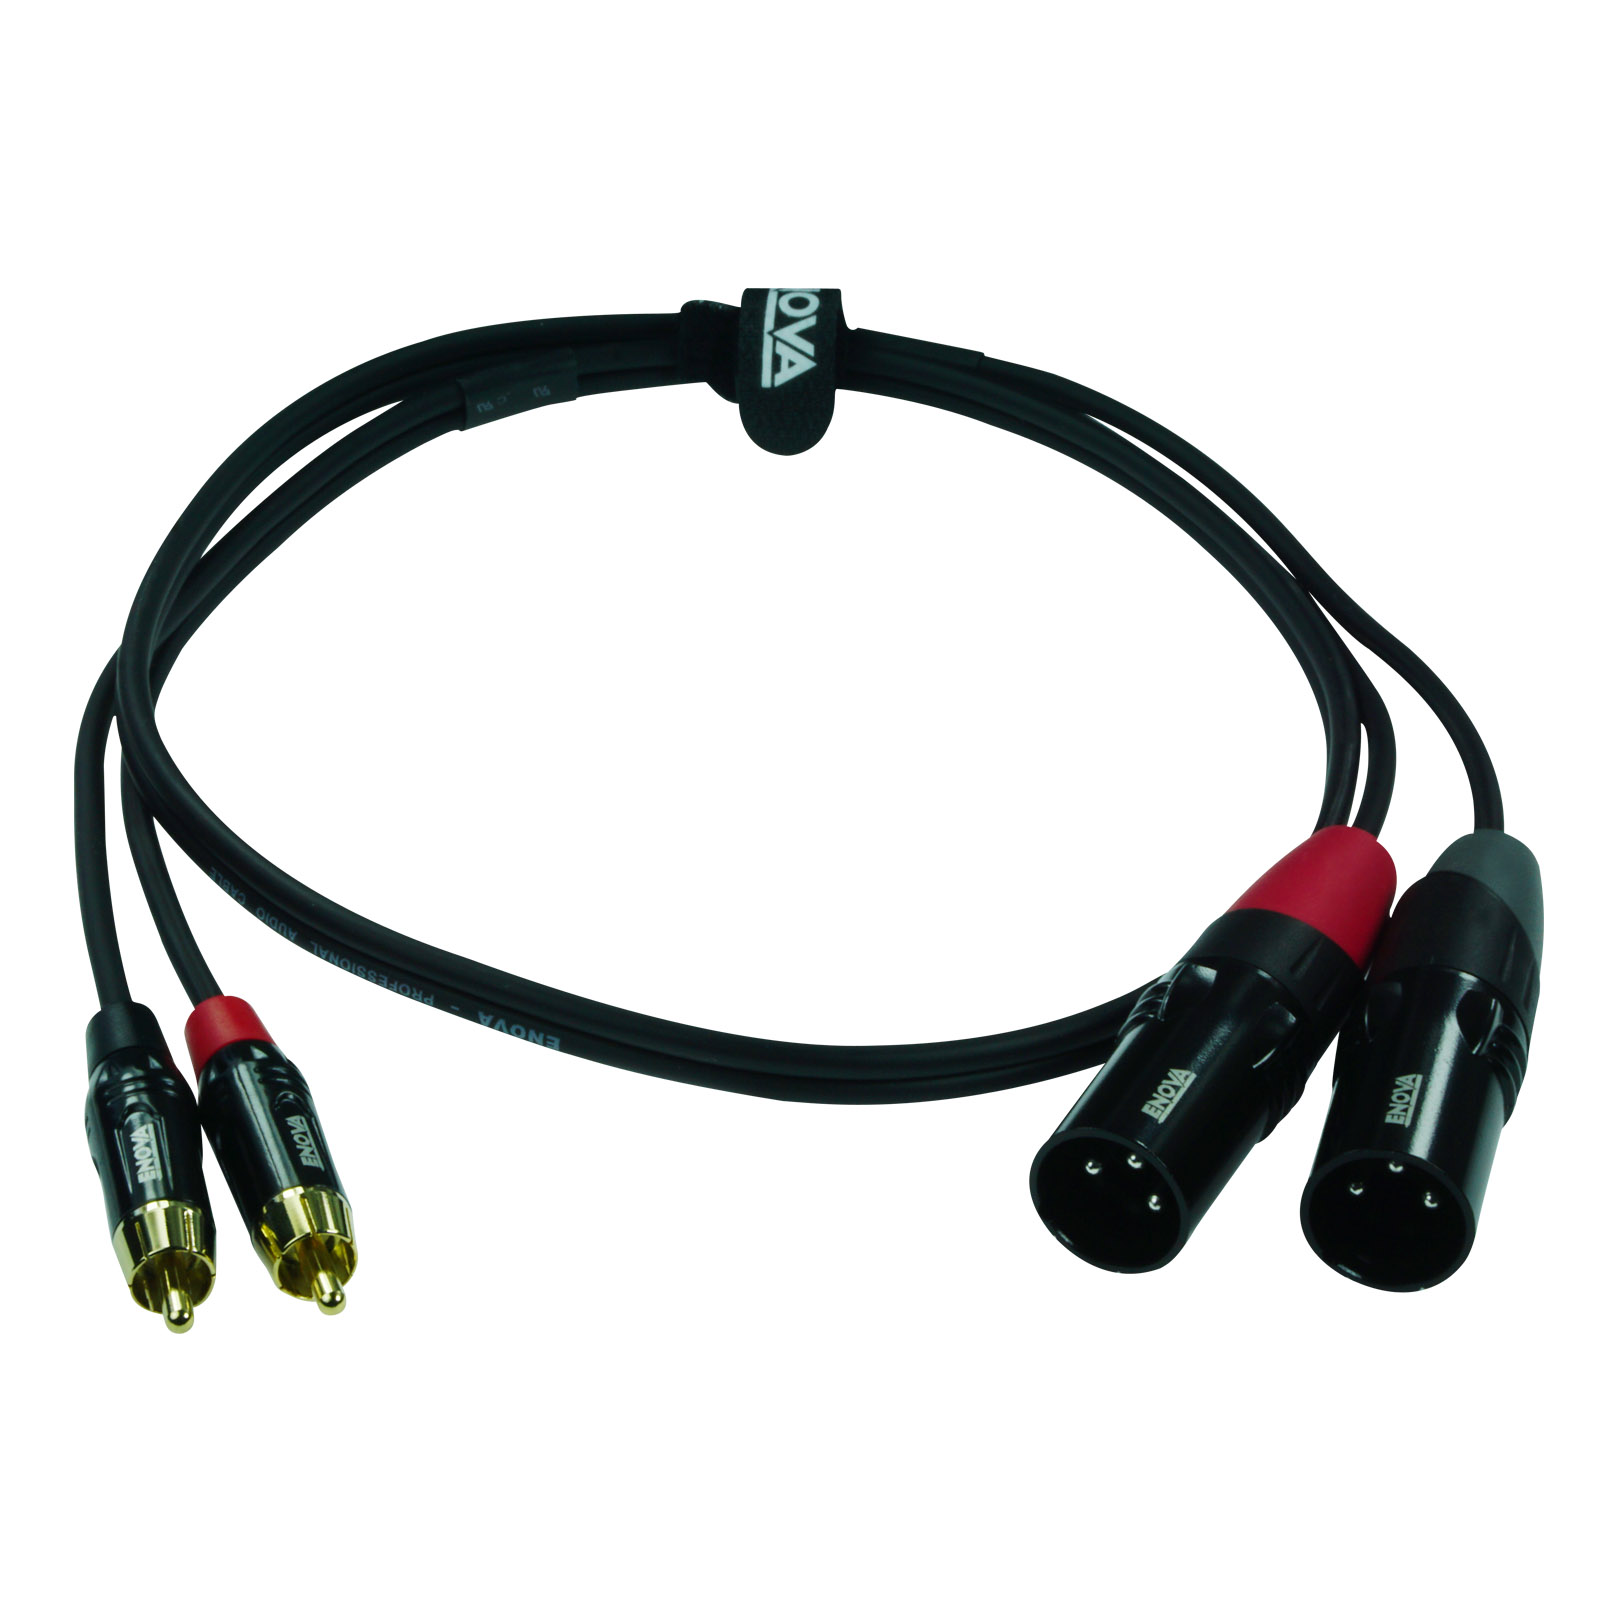 ENOVA, 1 meter stereo adapter cable 2x RCA male to 2x XLR male